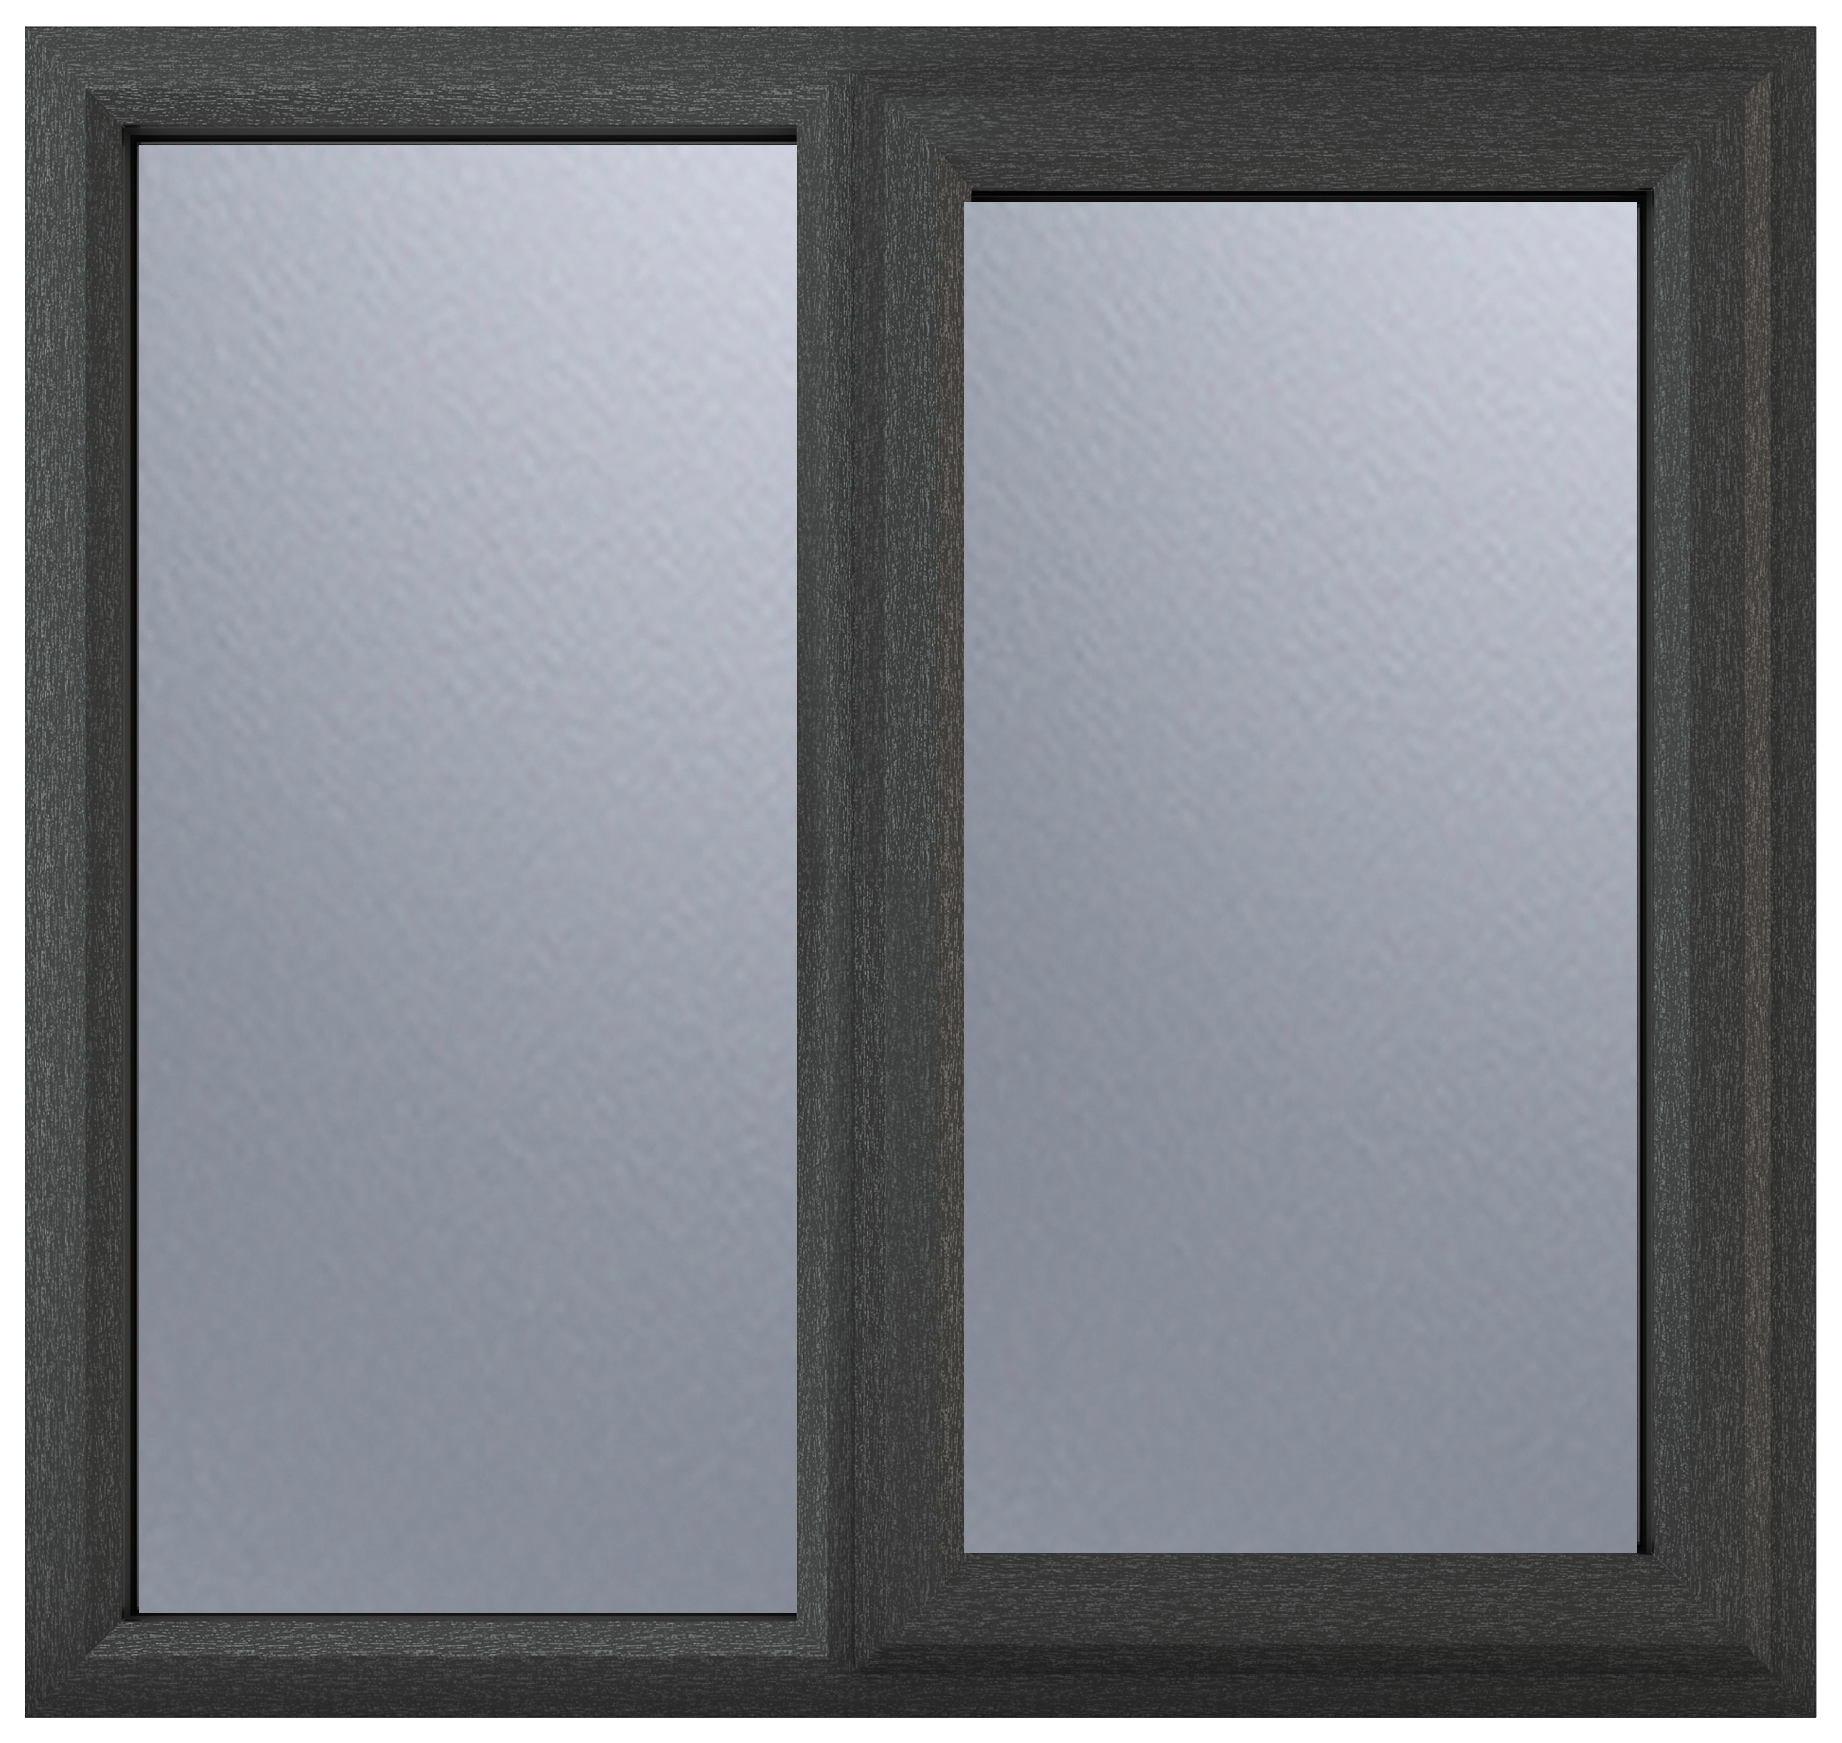 Crystal uPVC Grey / White Right Hung Obscure Triple Glazed Window - 1190 x 1040mm